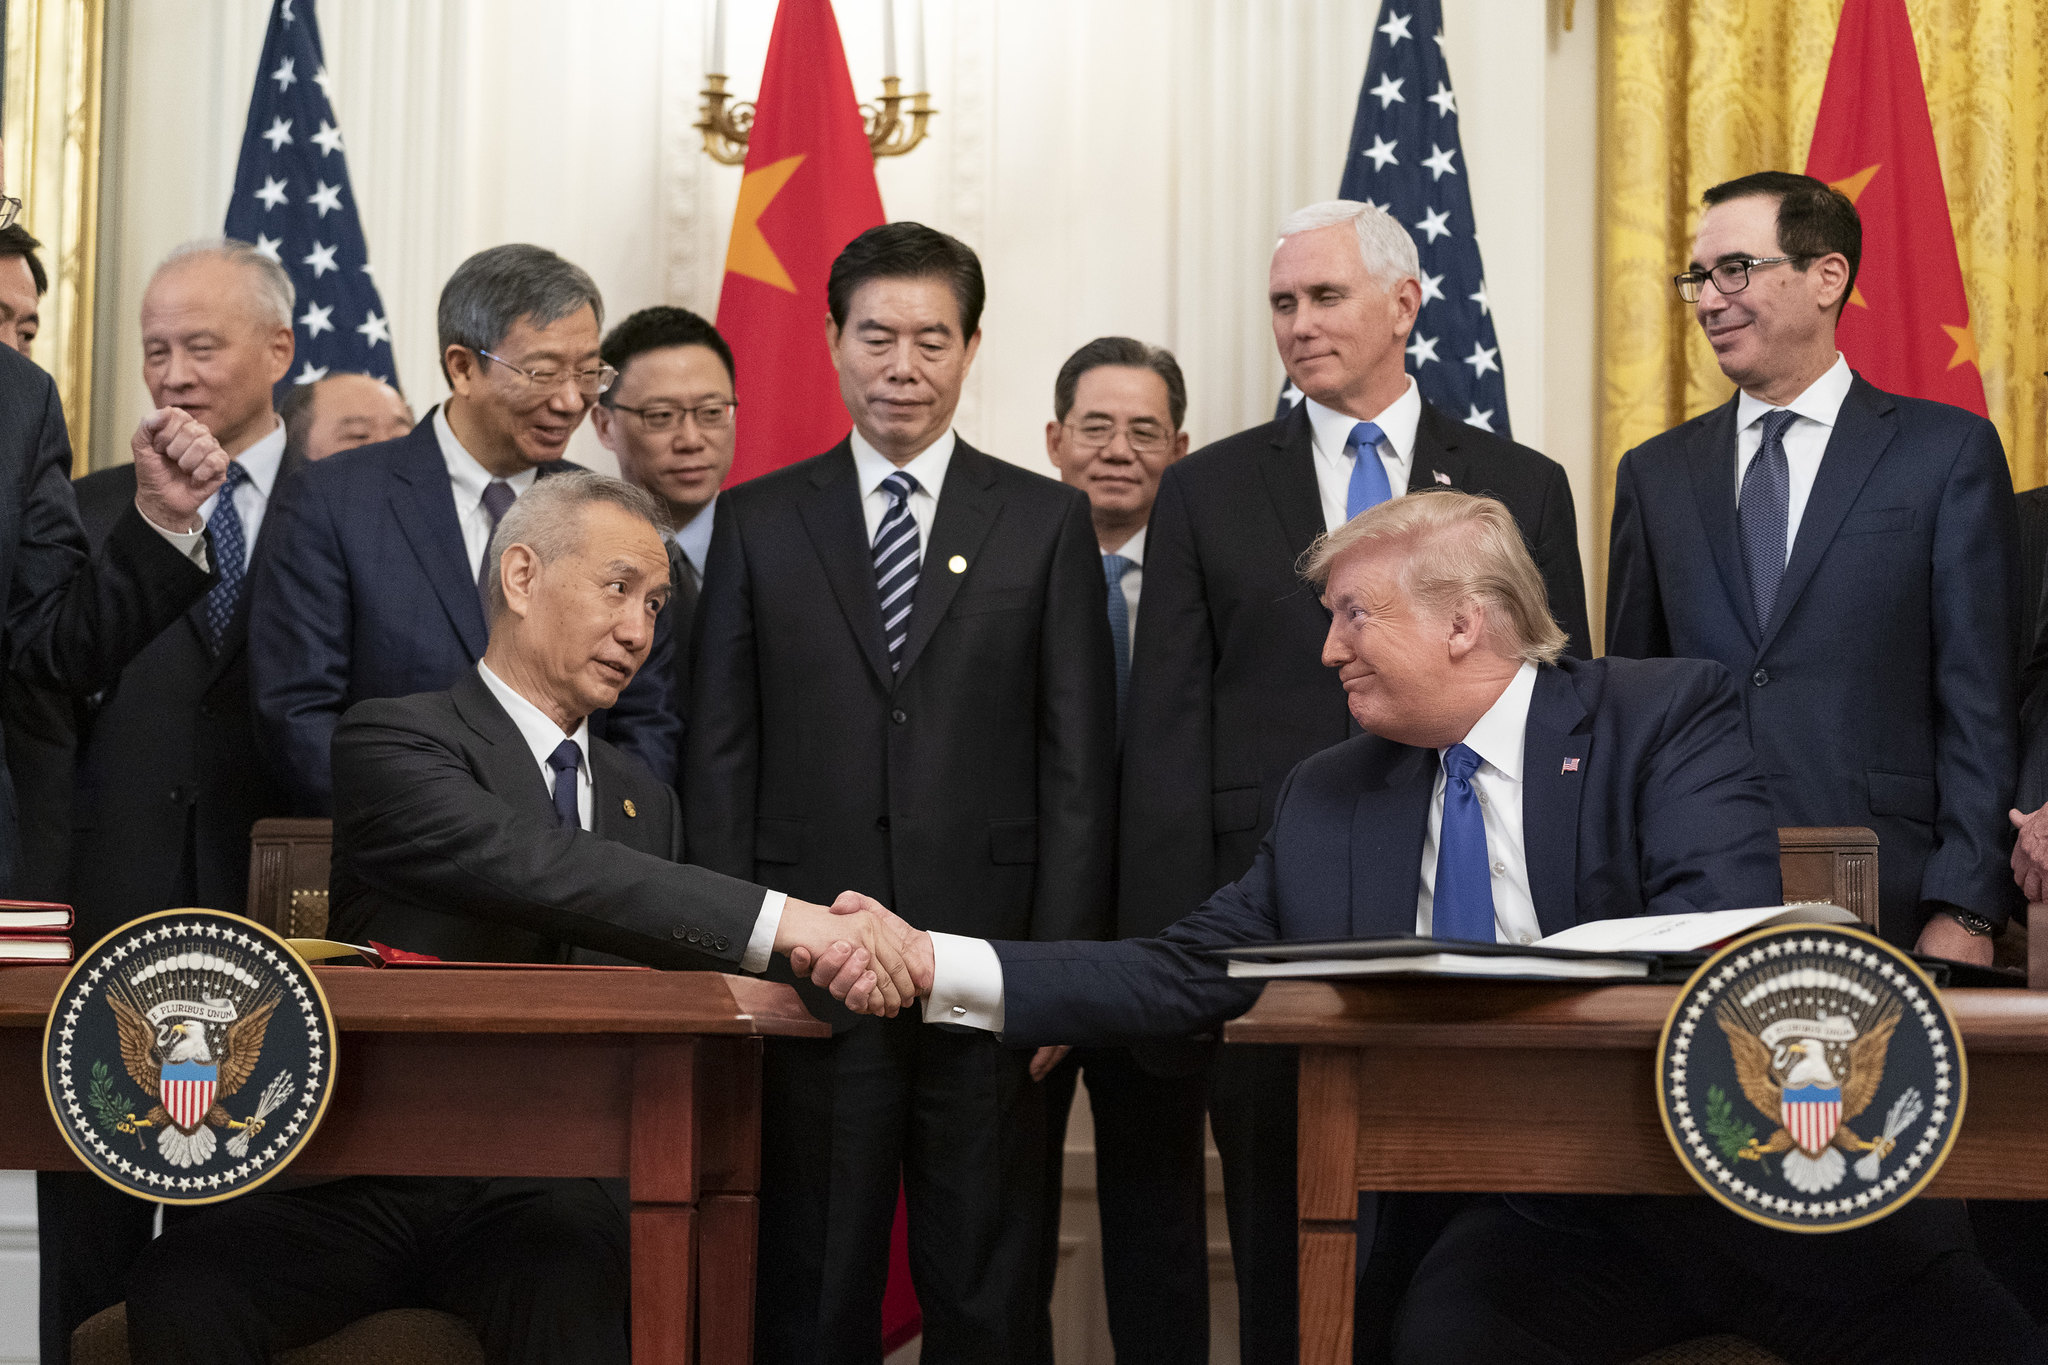 U.S.-China Phase One Trade Deal: What’s In It for Farmers?